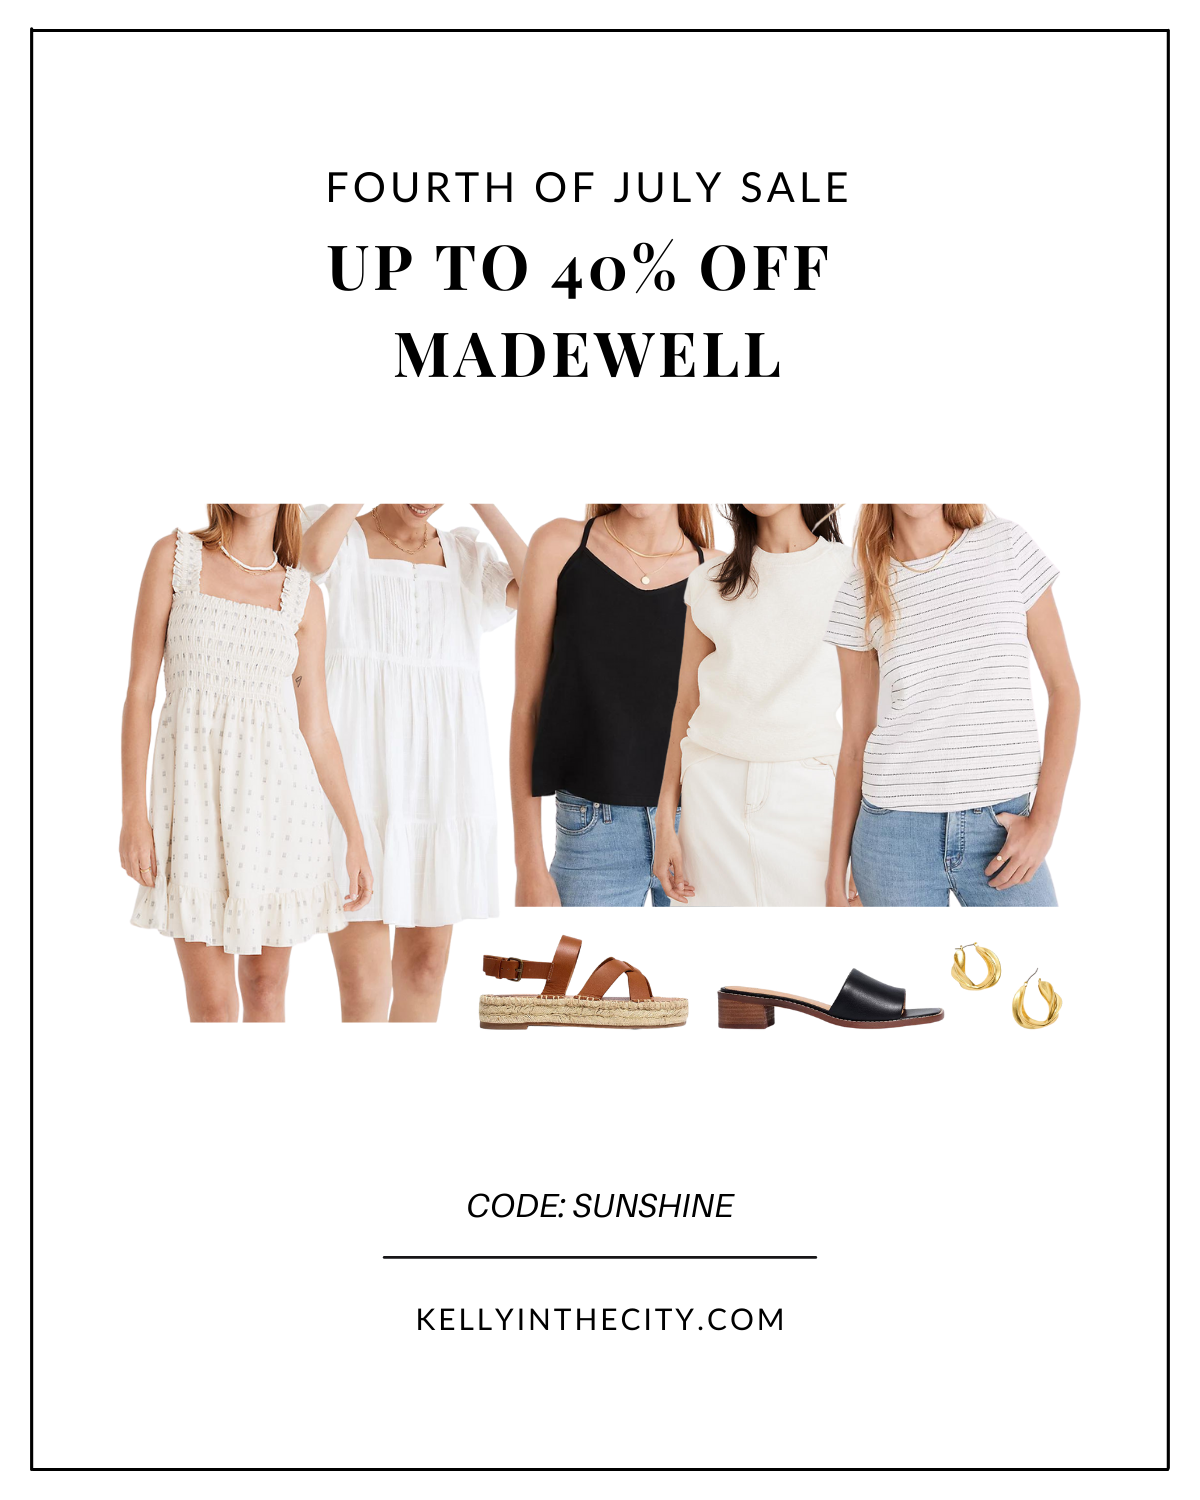 Madewell 4th of July Sales